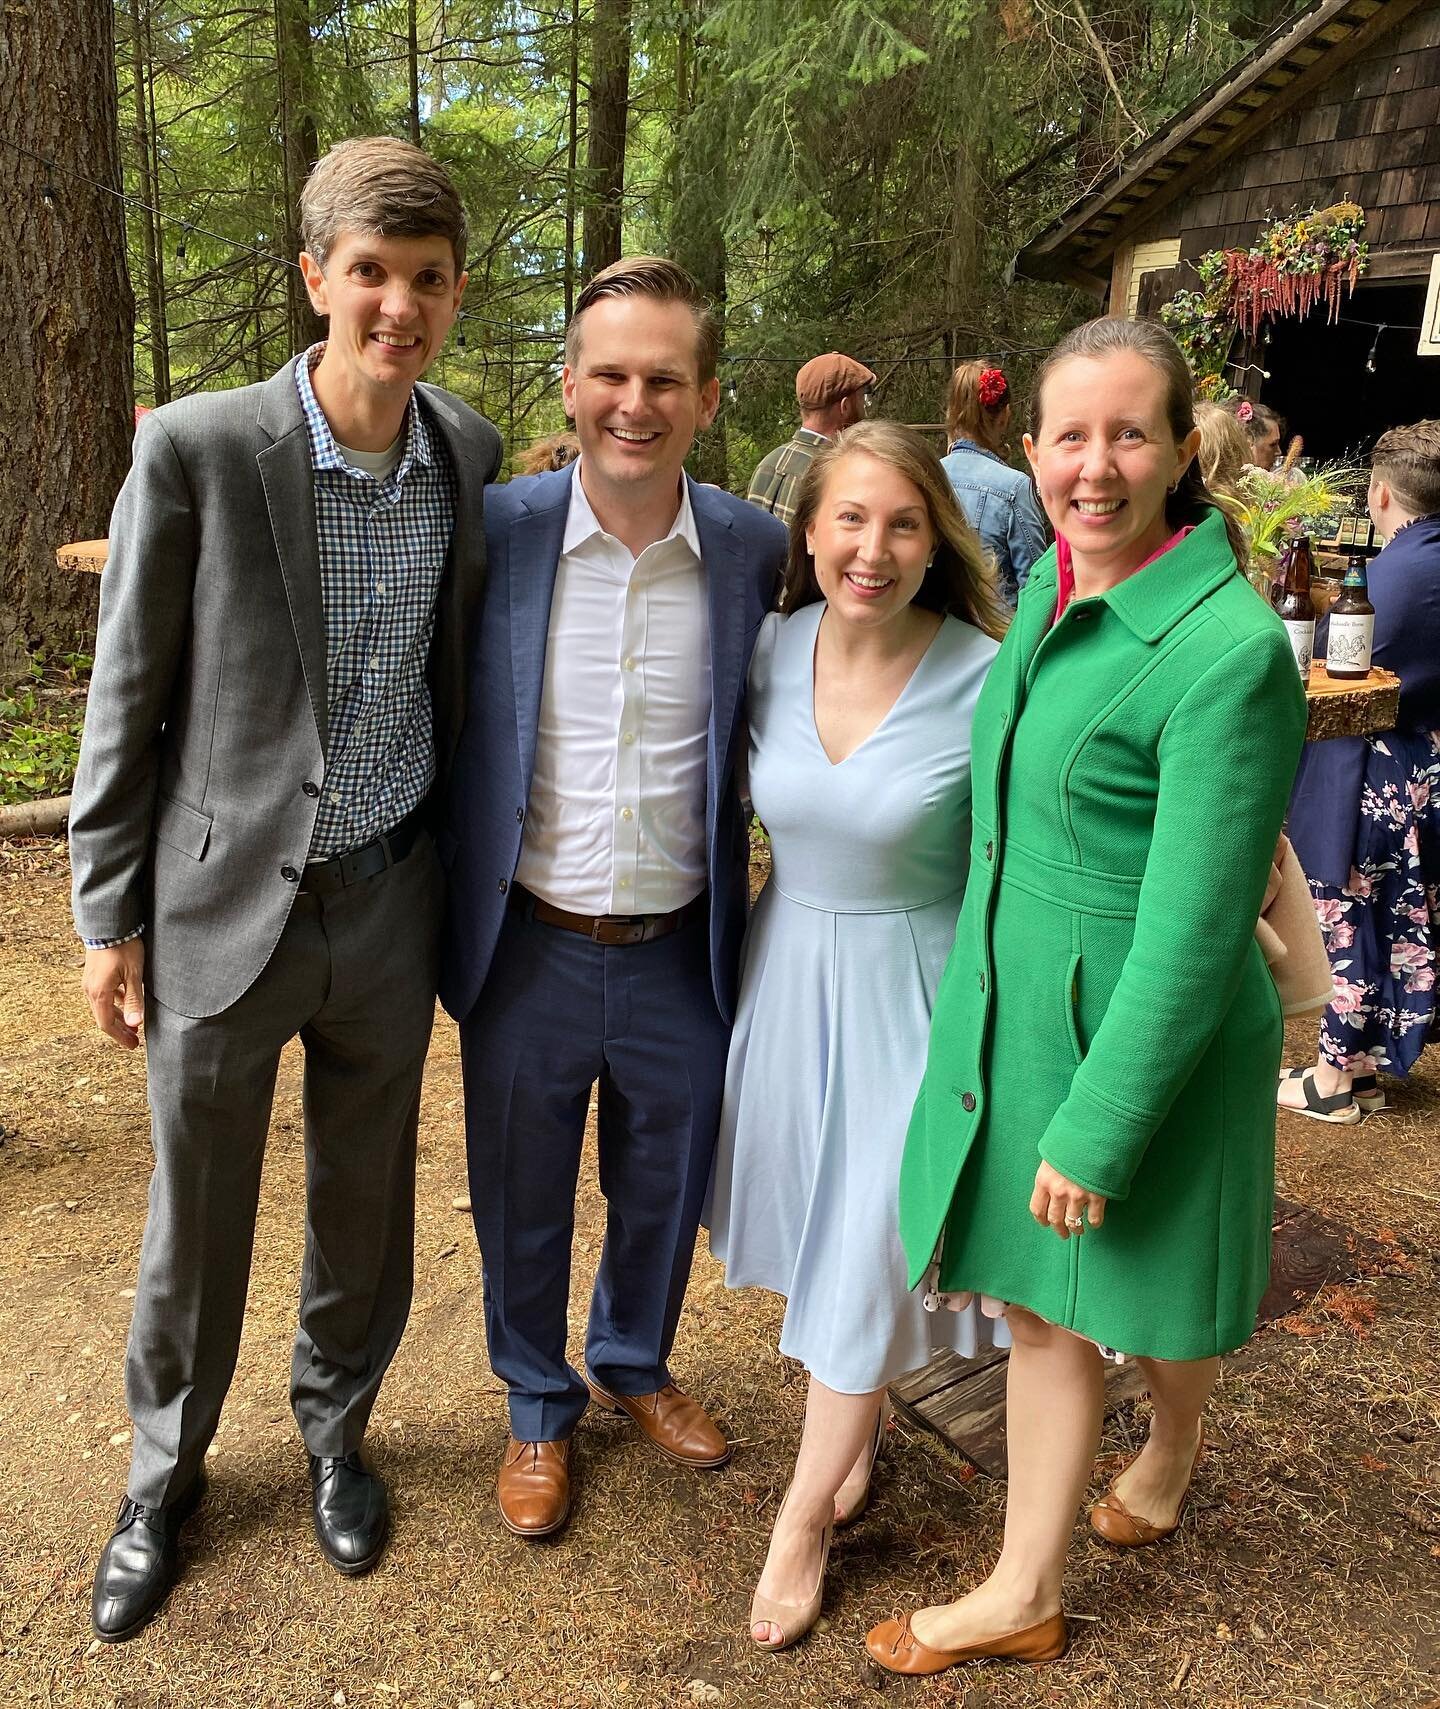 Catching up with some wonderful friends at Andy and Melissa&rsquo;s wedding &ndash; which they hosted at their beautiful homestead, Hidden Penny Farm!